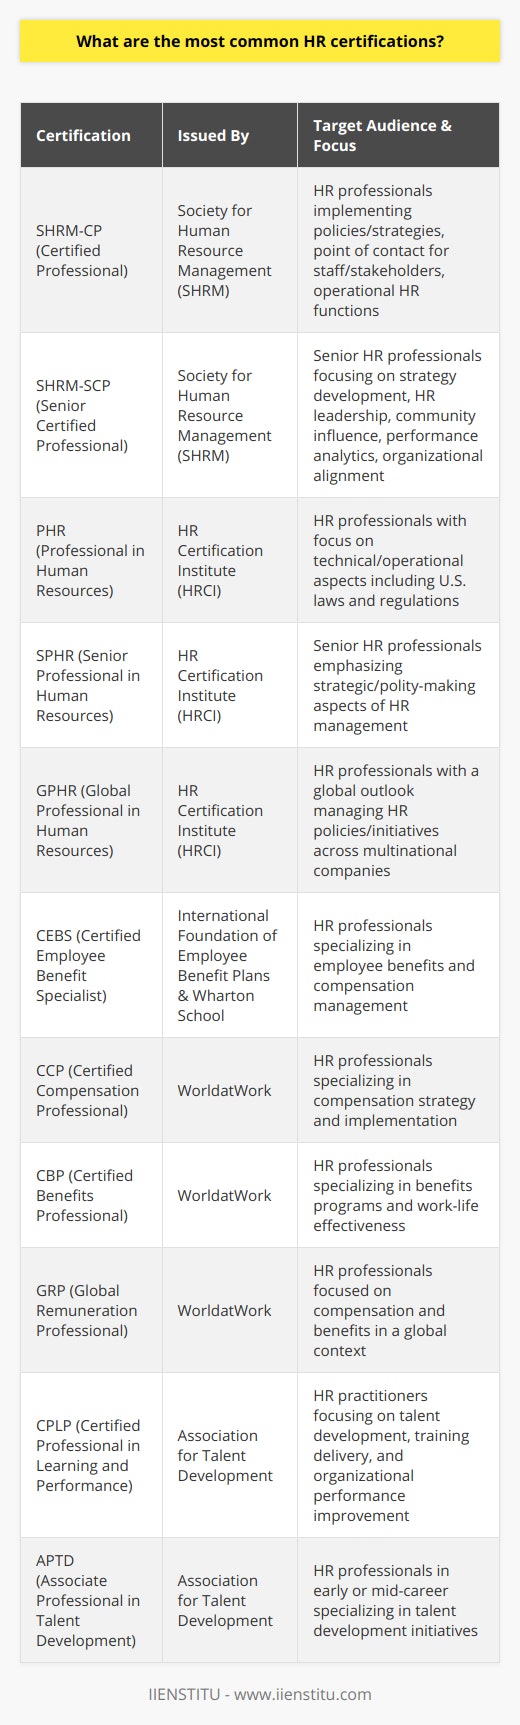 Human Resources (HR) is a dynamic field that requires practitioners to continuously evolve their skills and understanding of workforce management. As a result, many HR professionals seek certifications that not only enhance their expertise but also validate their commitment to the profession. Below are some of the most common HR certifications that professionals pursue.SHRM-CP and SHRM-SCPOrganized by the Society for Human Resource Management, the SHRM Certified Professional (SHRM-CP) and SHRM Senior Certified Professional (SHRM-SCP) certifications are prestigious within the HR field. They are designed to affirm that a professional possesses the operational and strategic competencies required for effective job performance. The SHRM-CP is geared towards HR professionals who implement policies and strategies, serve as point of contact for staff and stakeholders, and perform operational HR functions. On the other hand, the SHRM-SCP focuses on senior HR professionals who develop strategies, lead HR functions, foster influence in the community, analyse performance metrics, and align HR strategies to organizational goals.PHR and SPHRThe HR Certification Institute’s Professional in Human Resources (PHR) and Senior Professional in Human Resources (SPHR) are recognized for representing proficiency in the field of HR management. The PHR certification covers technical and operational aspects of HR management, including U.S. laws and regulations. The SPHR is suited for senior HR professionals and emphasizes strategic and policy-making aspects. Both these certifications require candidates to pass an examination that tests their knowledge and skills.GPHRHRCI also offers the Global Professional in Human Resources (GPHR) certification, which is suitable for HR professionals directly involved with multi-national companies and global HR. This certification recognizes professionals who have the skills and knowledge to manage HR policies and initiatives that support the global operations of organizations. It requires a solid understanding of international HR practices and regulations.CEBS DesignationThe Certified Employee Benefit Specialist (CEBS) program, which is the result of a partnership between the International Foundation of Employee Benefit Plans and the Wharton School of the University of Pennsylvania, is unique in its focus on employee benefits. This certification allows HR professionals to specialize in the complexities of benefits and compensation, which are critical aspects of employee satisfaction and organizational performance.WorldatWork CertificationsWith a focus on total rewards, which includes compensation, benefits, work-life effectiveness, and recognition among other attributes, WorldatWork certifications such as Certified Compensation Professional (CCP), Certified Benefits Professional (CBP), and Global Remuneration Professional (GRP) are aimed at HR professionals who want to specialize in creating effective compensation and benefits programs for businesses.Talent Development CertificationsFor HR practitioners who concentrate on training and development, the Association for Talent Development offers certifications like the Certified Professional in Learning and Performance (CPLP) and the Associate Professional in Talent Development (APTD). These credentials focus on the ability to manage talent development initiatives, design and deliver training, and improve individual and organizational performance.These certifications are often sought after for their potential to open doors to advanced career opportunities and increase earning potential. HR professionals who invest time and energy into obtaining these credentials not only demonstrate to employers a dedication to maintaining high professional standards but also possess a competitive edge in the job market. Whether for advancement or specialization, HR certifications are an integral part of career development in the human resources profession.